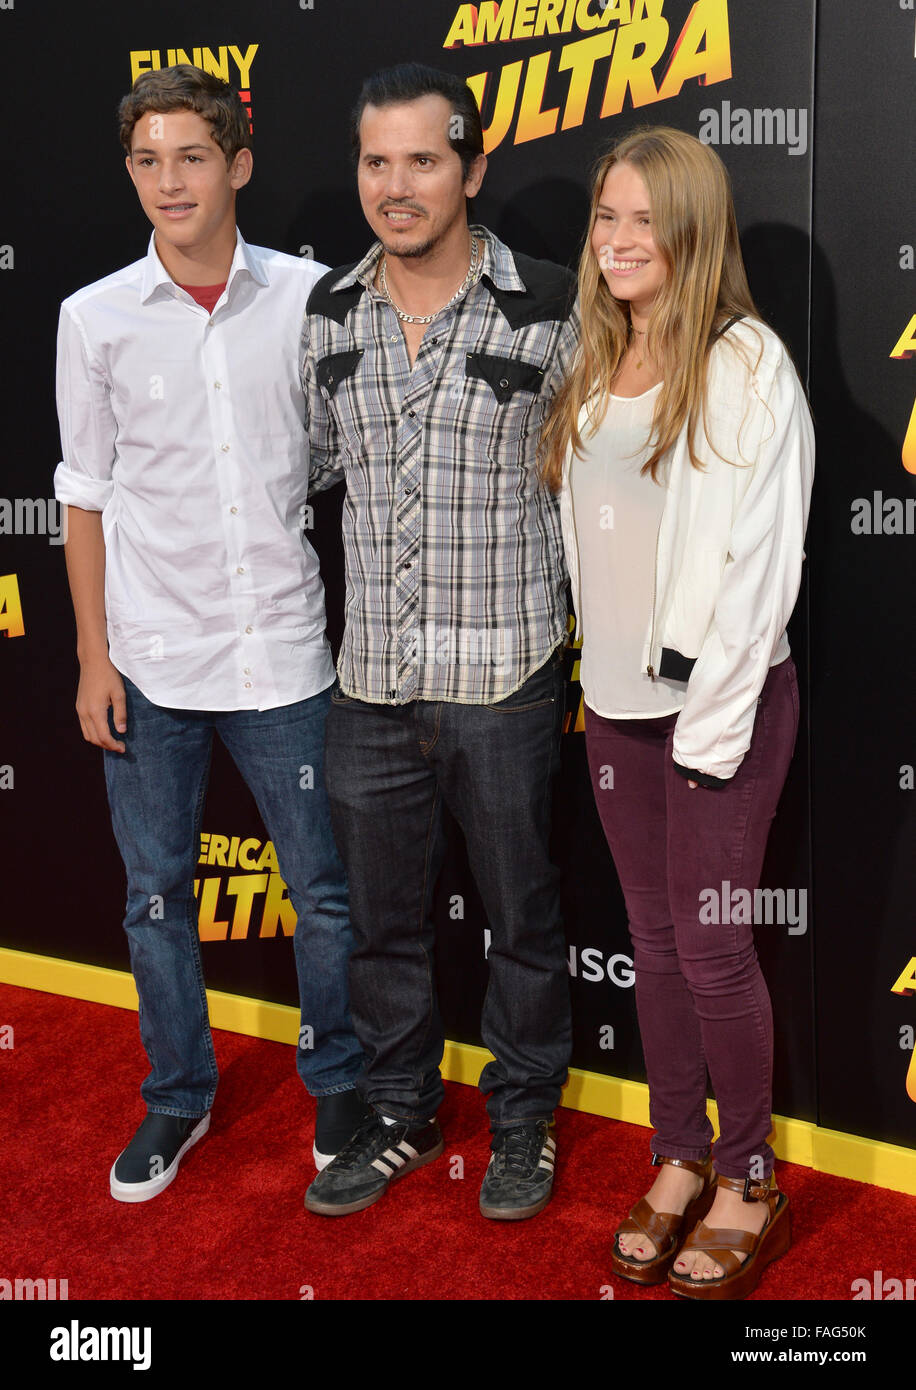 LOS ANGELES, CA - AUGUST 18, 2015: John Leguizamo & children Ryder & Allegra at the world premiere of his movie 'American Ultra' at The Ace Hotel Downtown. Stock Photo